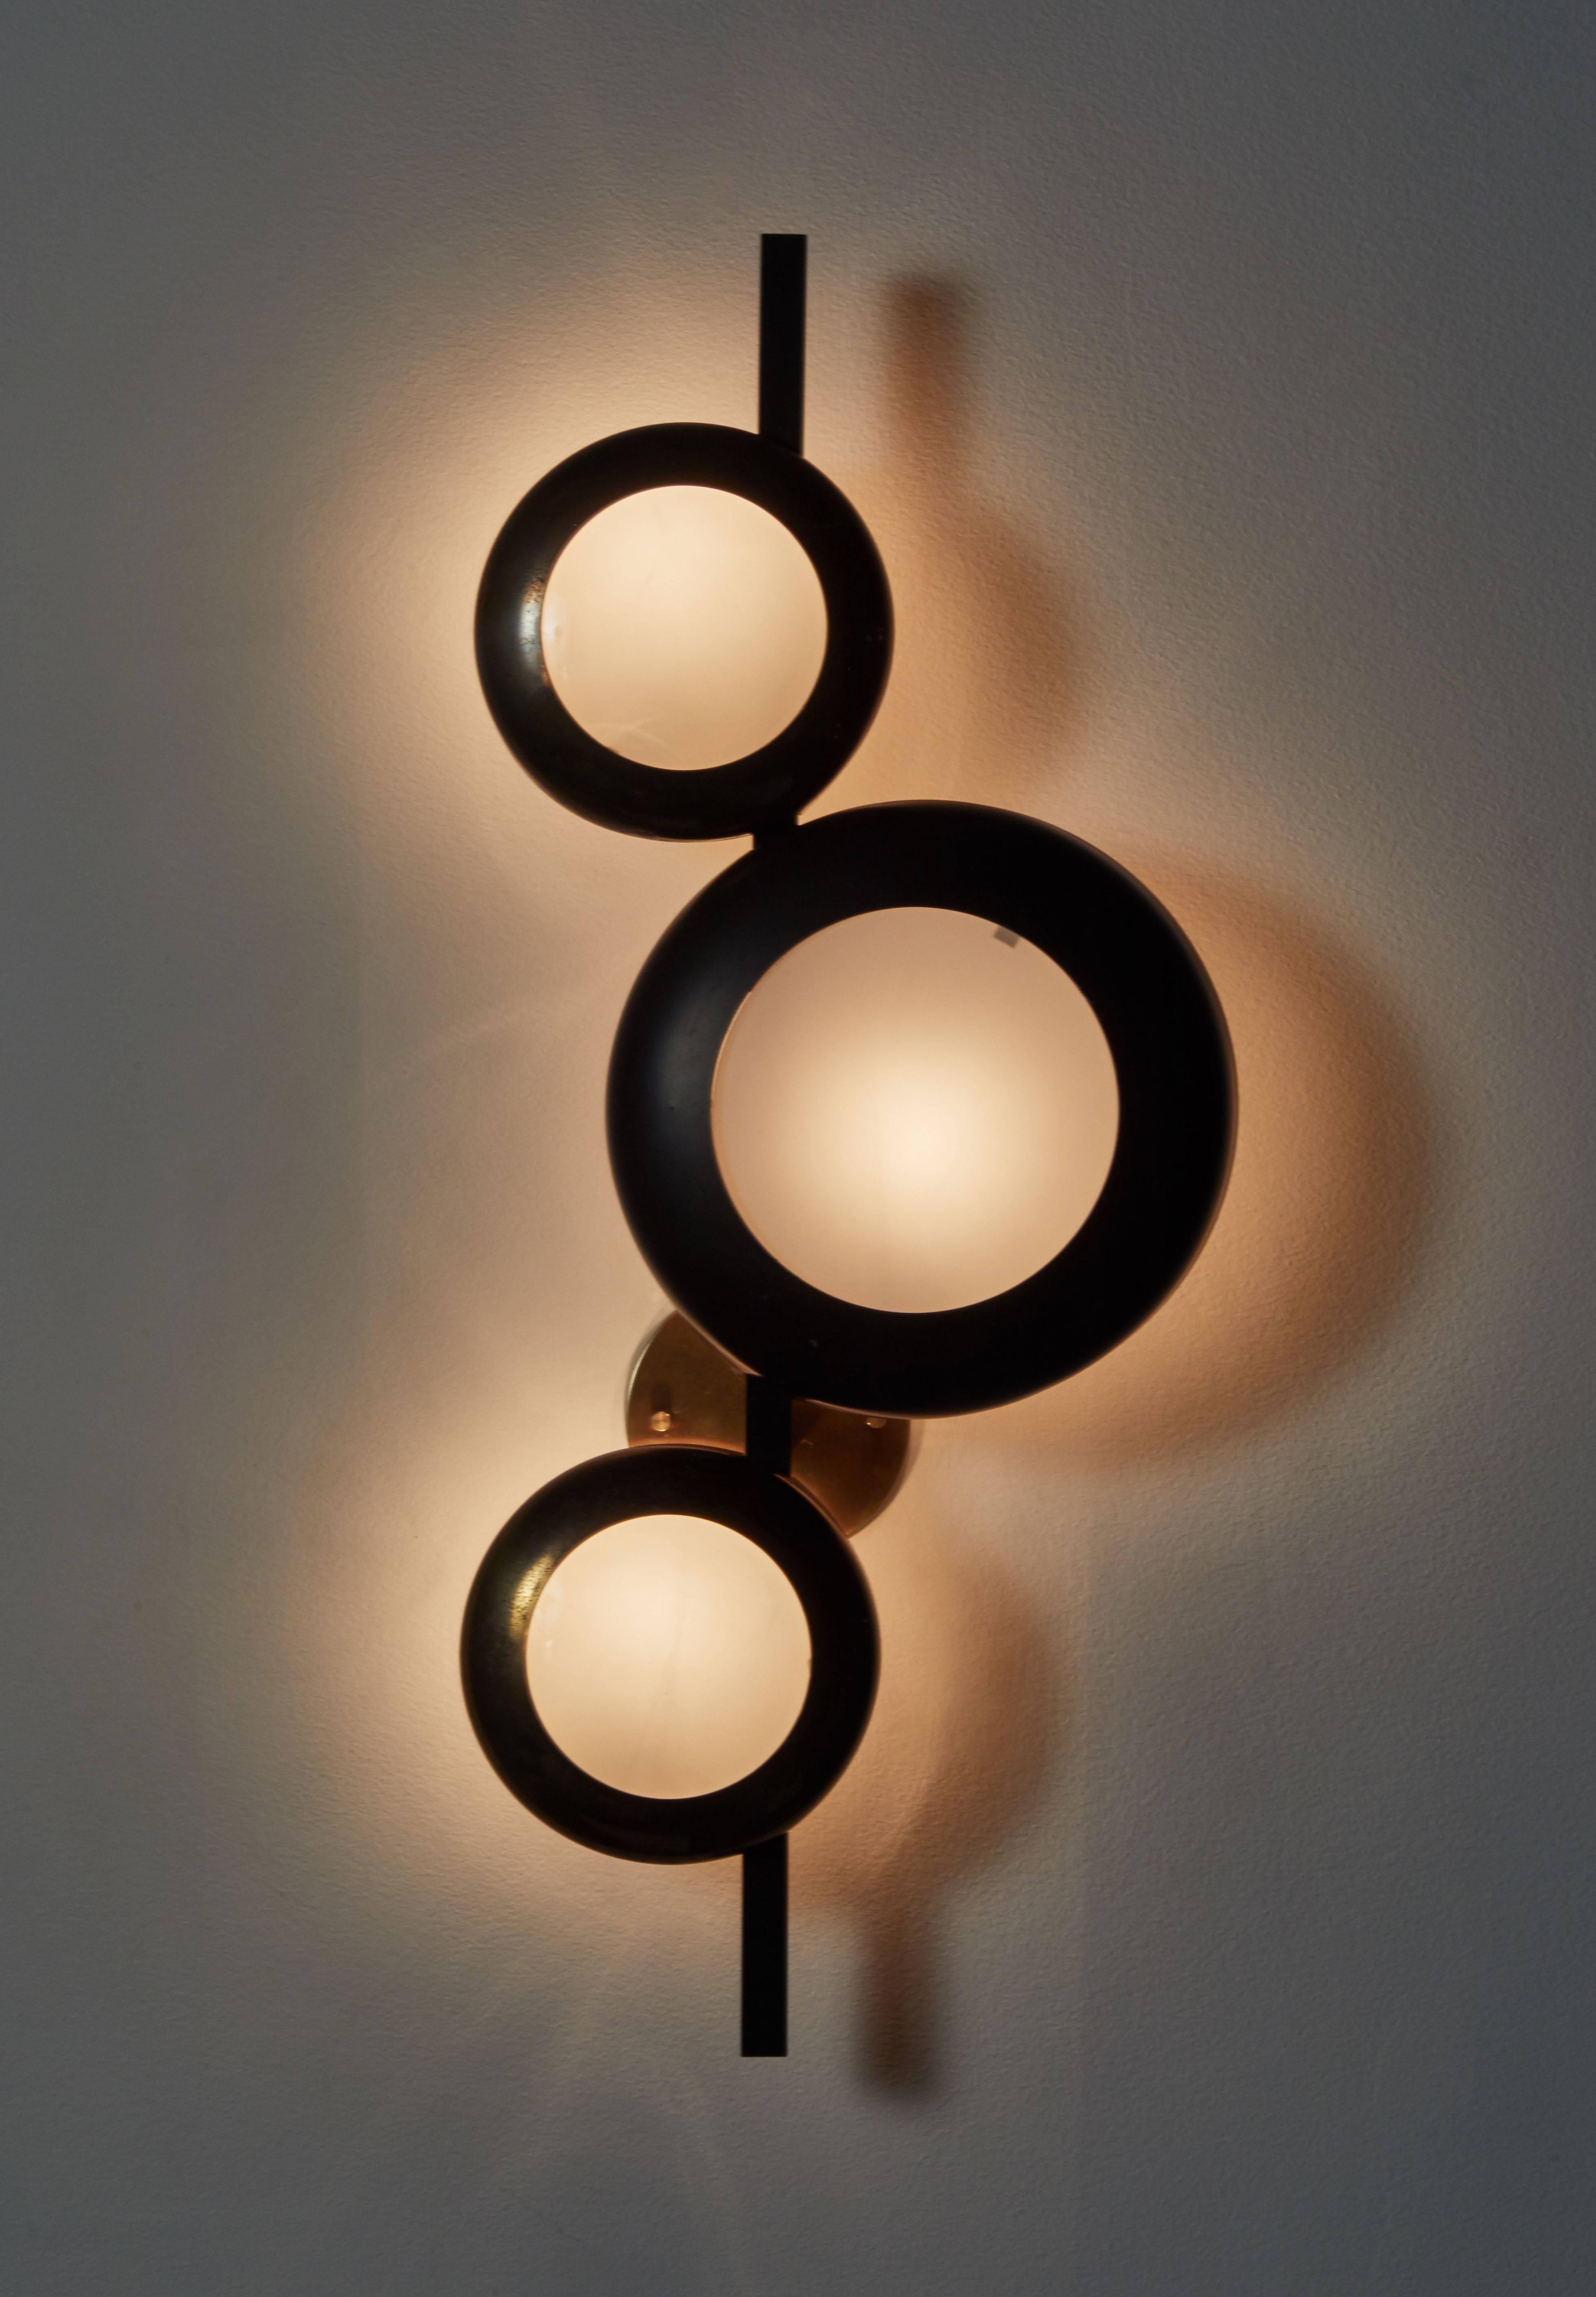 Wall light by Oscar Torlasco. Designed and manufactured in Italy for Lumi, circa 1950s. Brass and brushed satin glass. Rewired for US junction boxes. Takes three European E27 30w maximum bulbs.